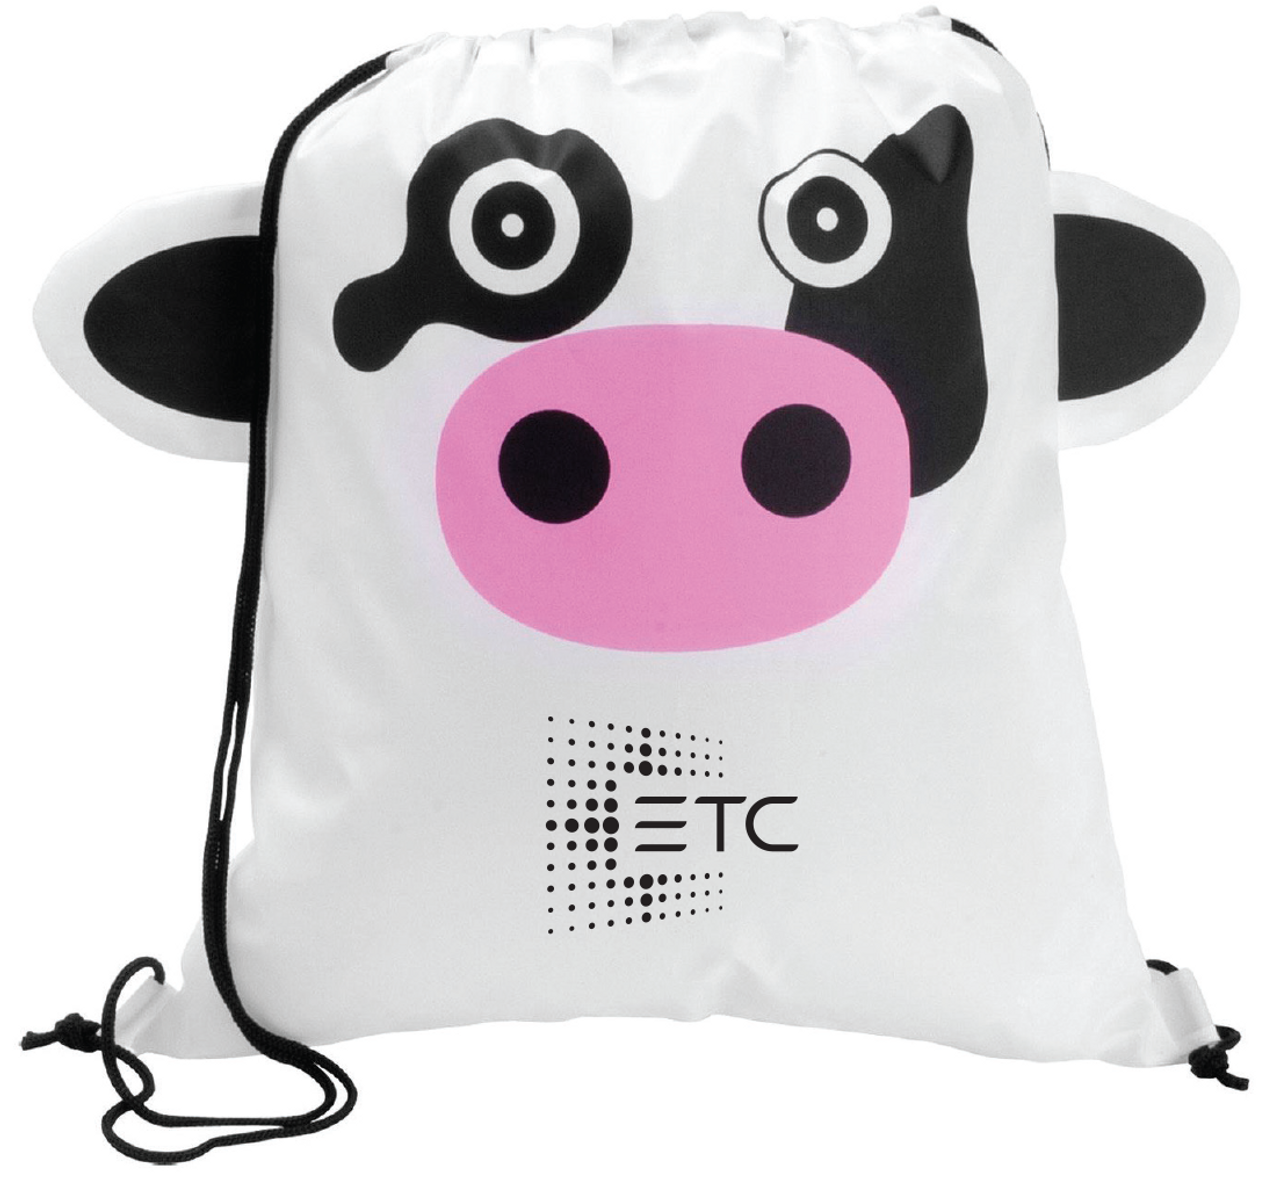 Cow print gift bag 12pcs Cow Pattern Paper Gift Bags Party Favor Bags  Goodies Bags for Birthday - Walmart.com